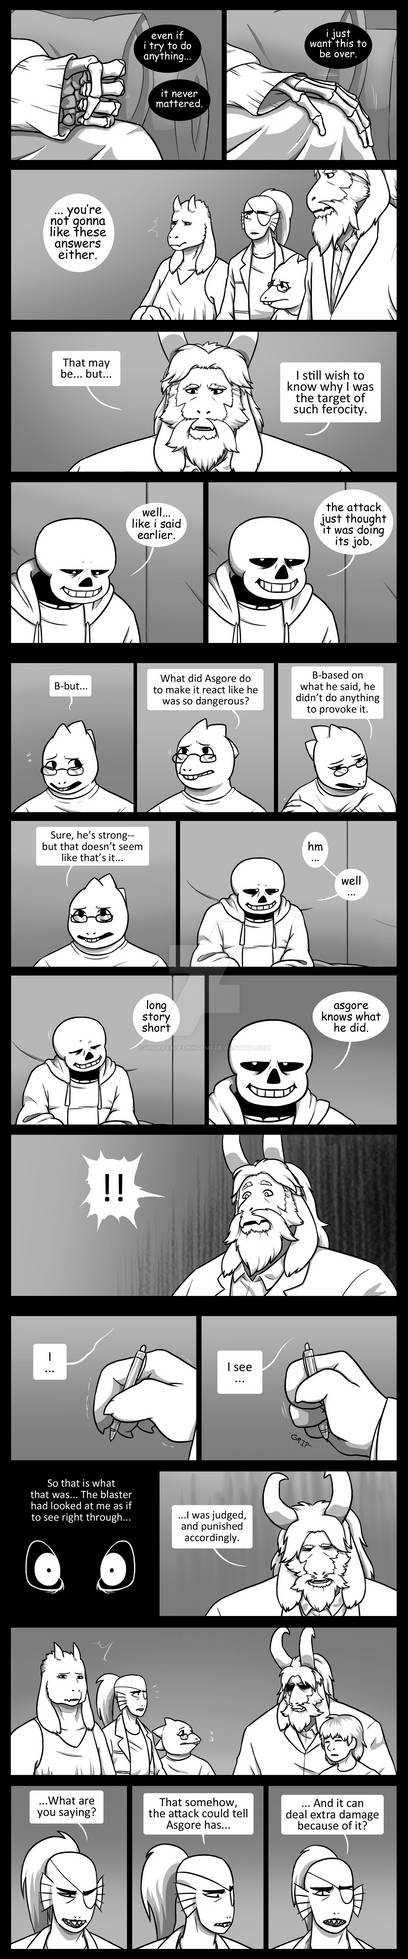 Unexpected Guests: Chapter 7, Part 14 by UndertaleThingems on DeviantArt